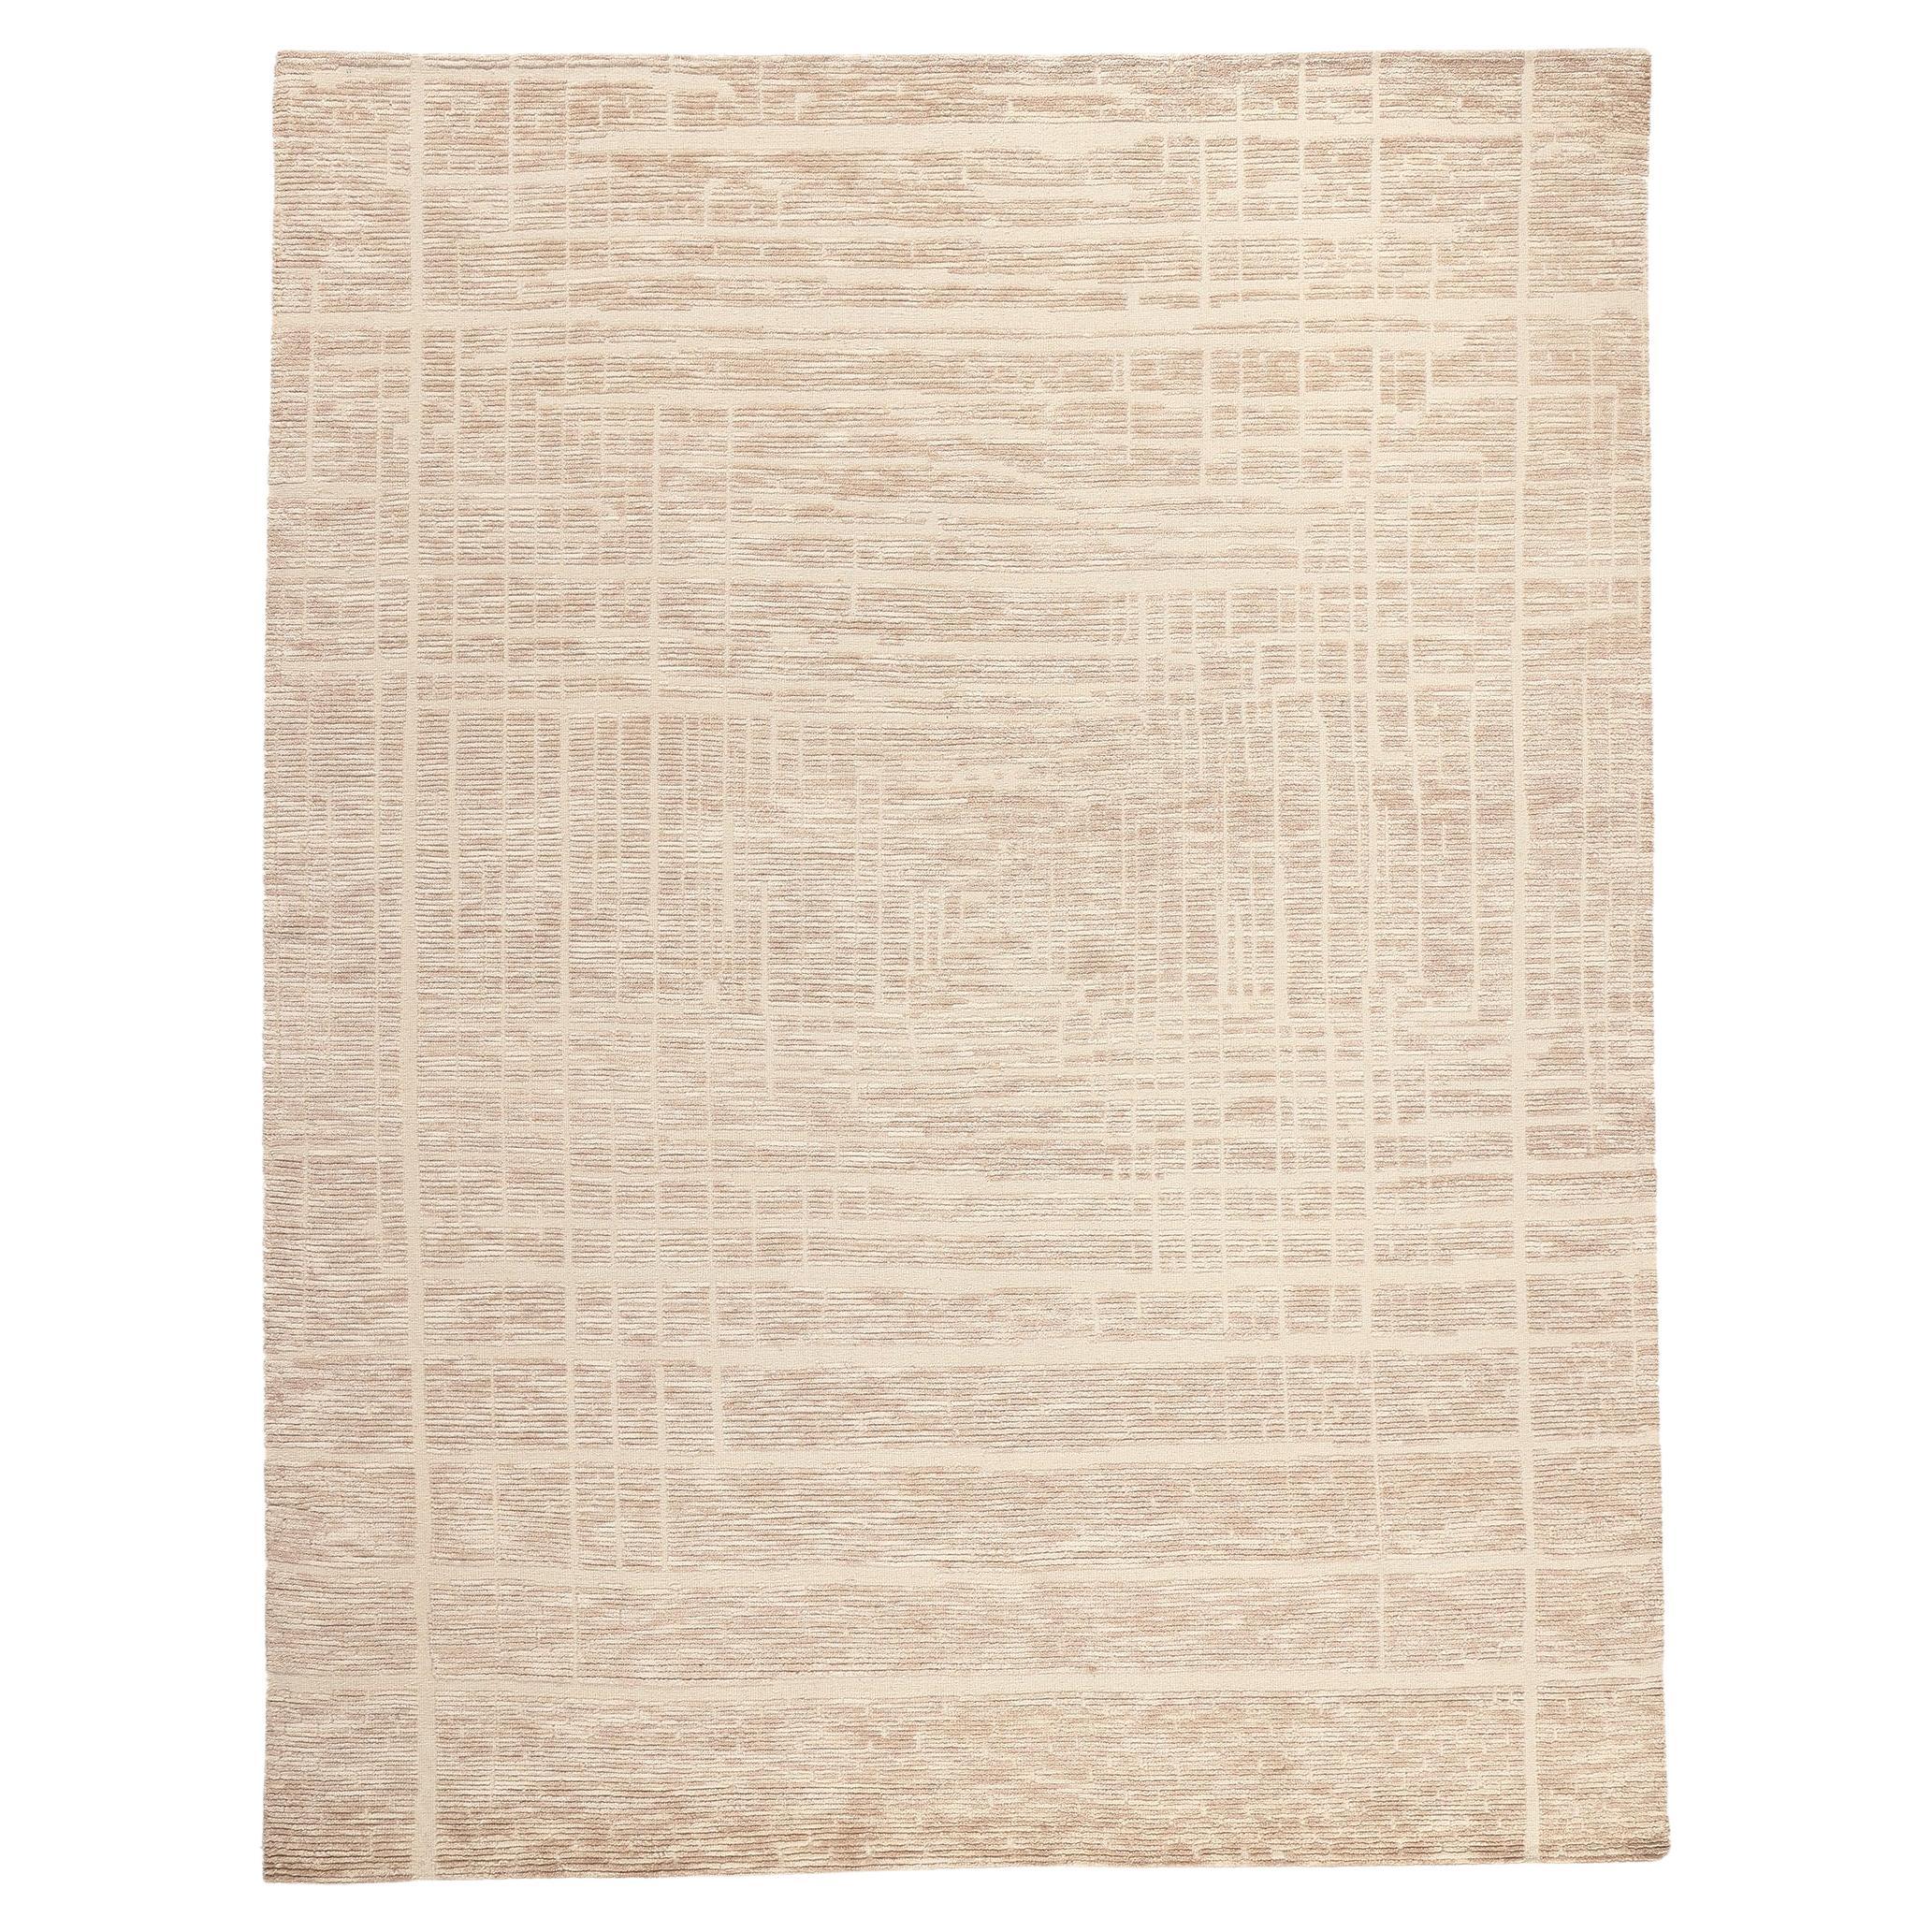 Organic Modern High-Low Rug, Abstract Expressionism Meets Subtle Shibui